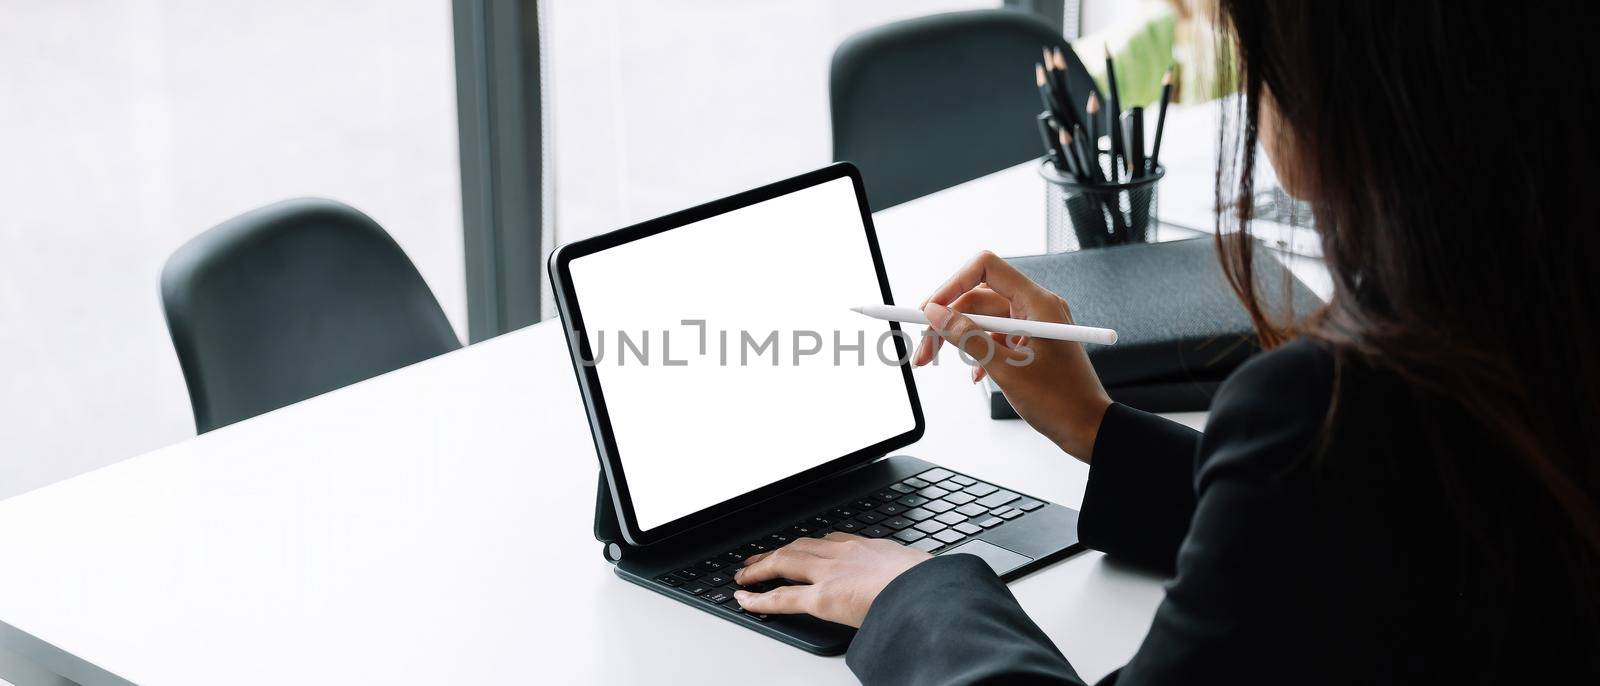 Businesswoman working with a stylus pen on a digital tablet with a laptop computer in a modern office